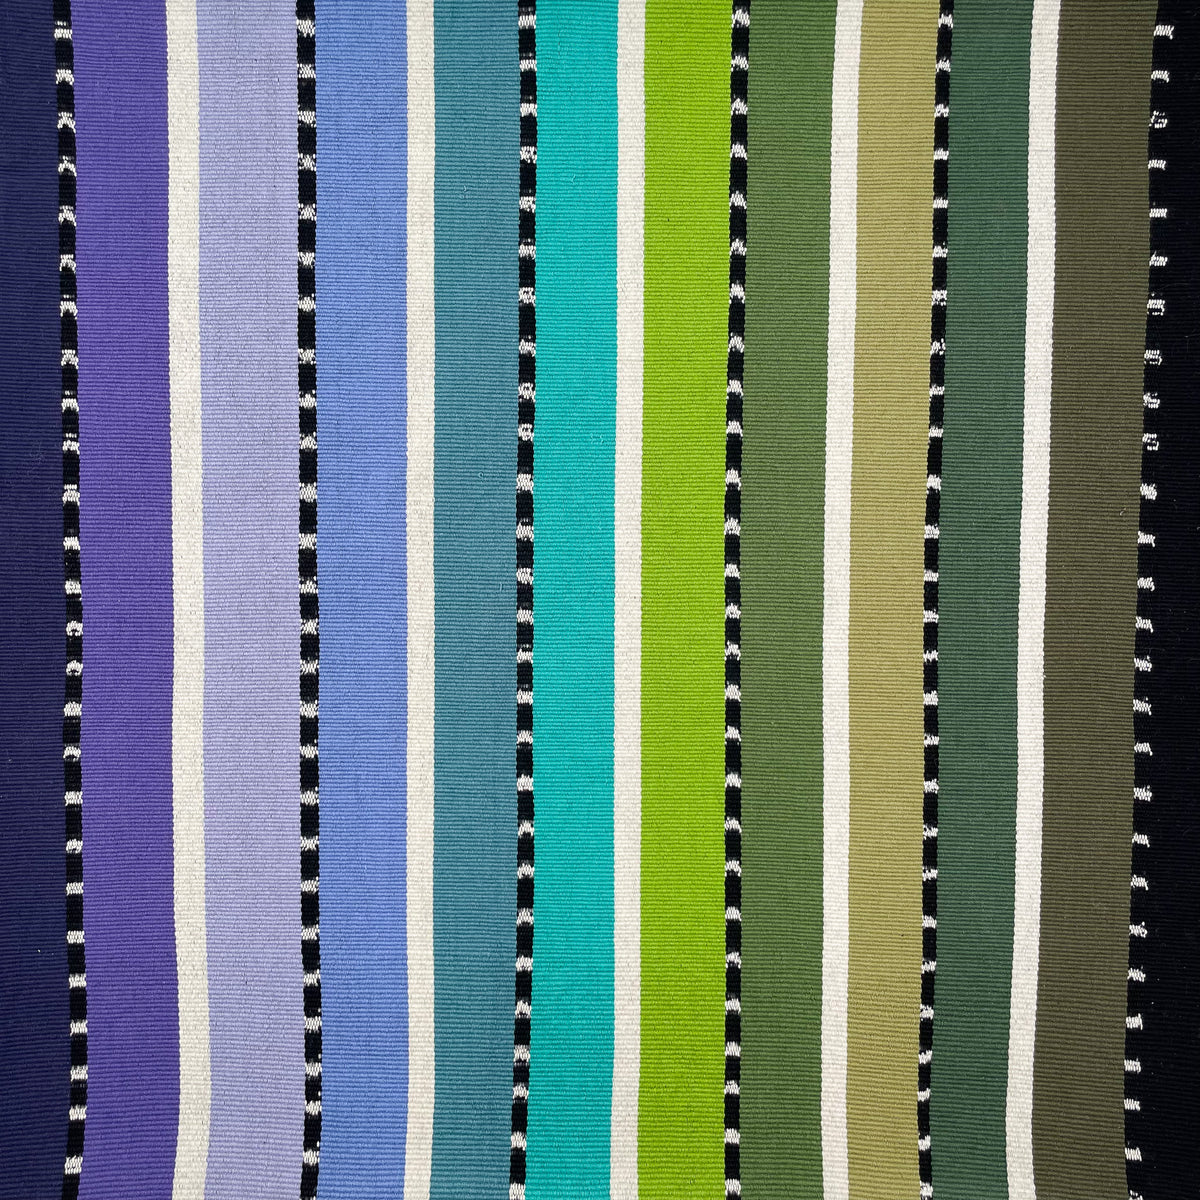 Closeup swatch of cushion cover with colorful stripes grading from purple, blue, teal, green, to black